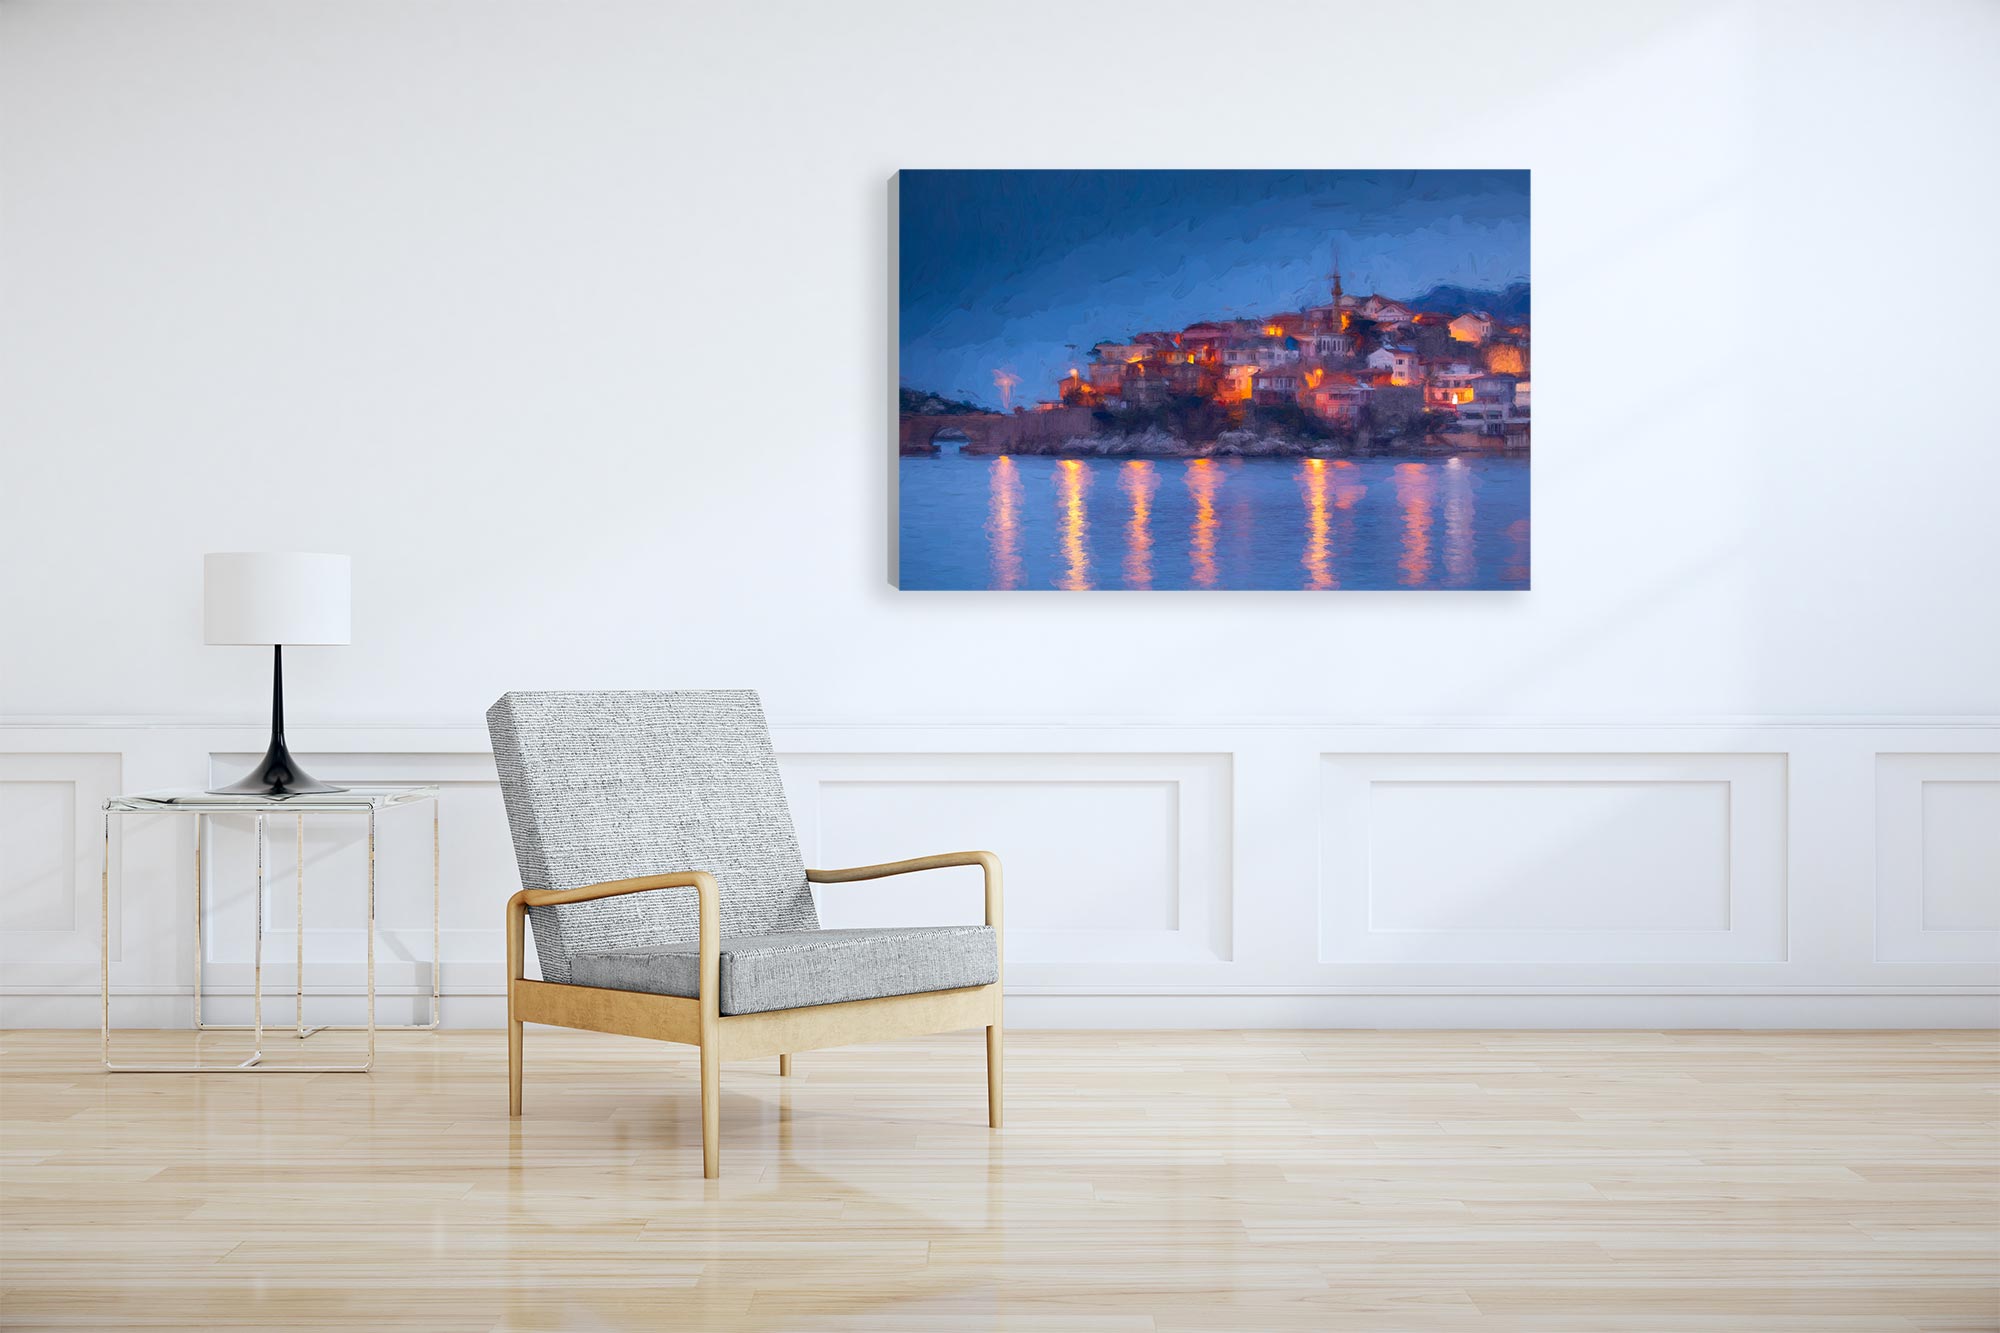 Black Sea Village at Night Canvas Print (Frame not Included)